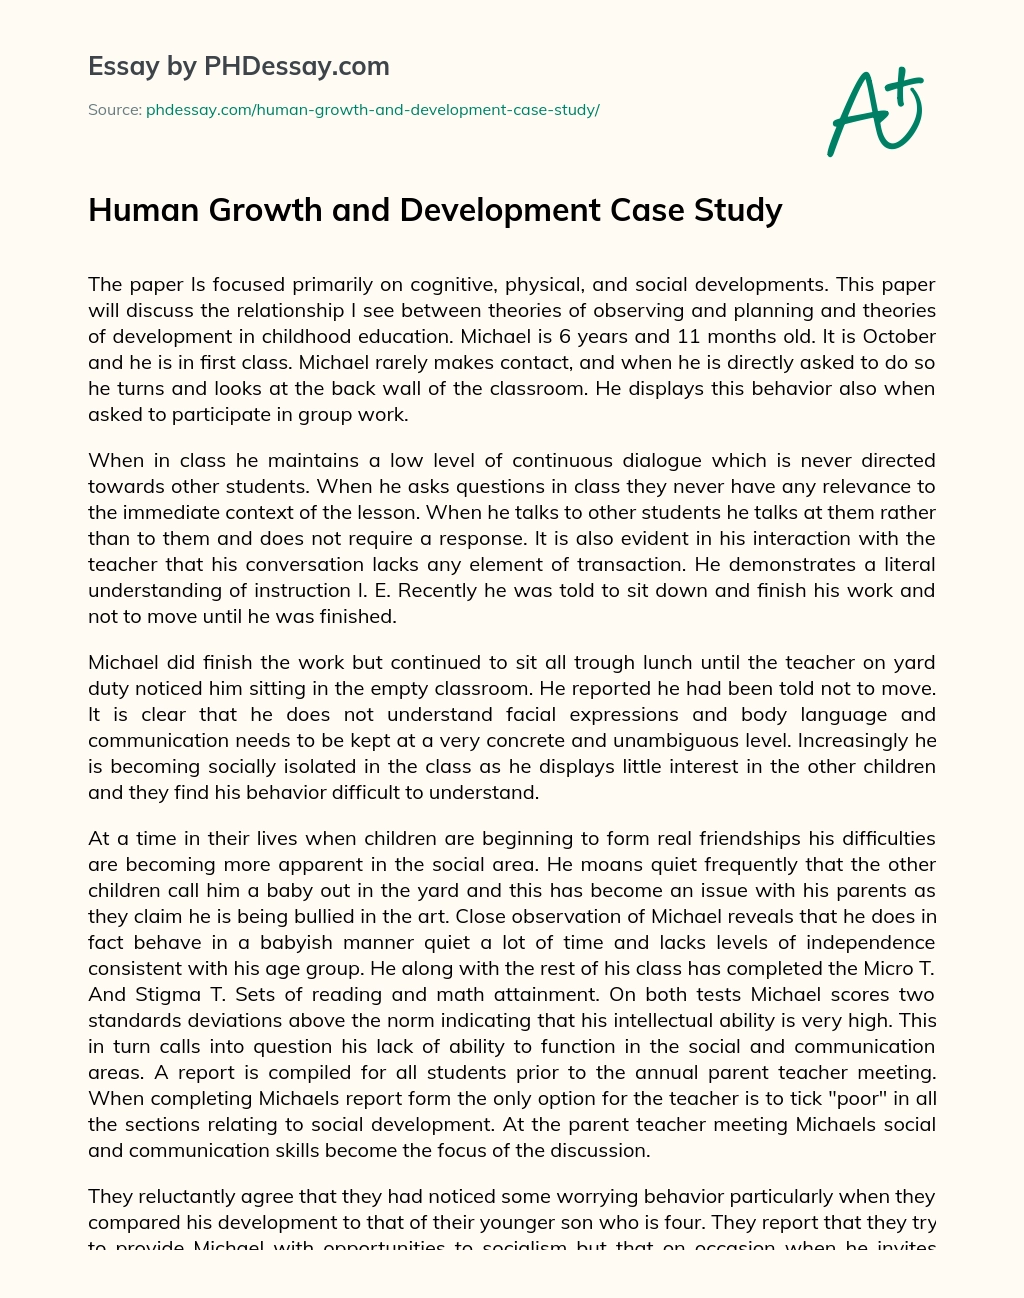 Human Growth and Development Case Study essay